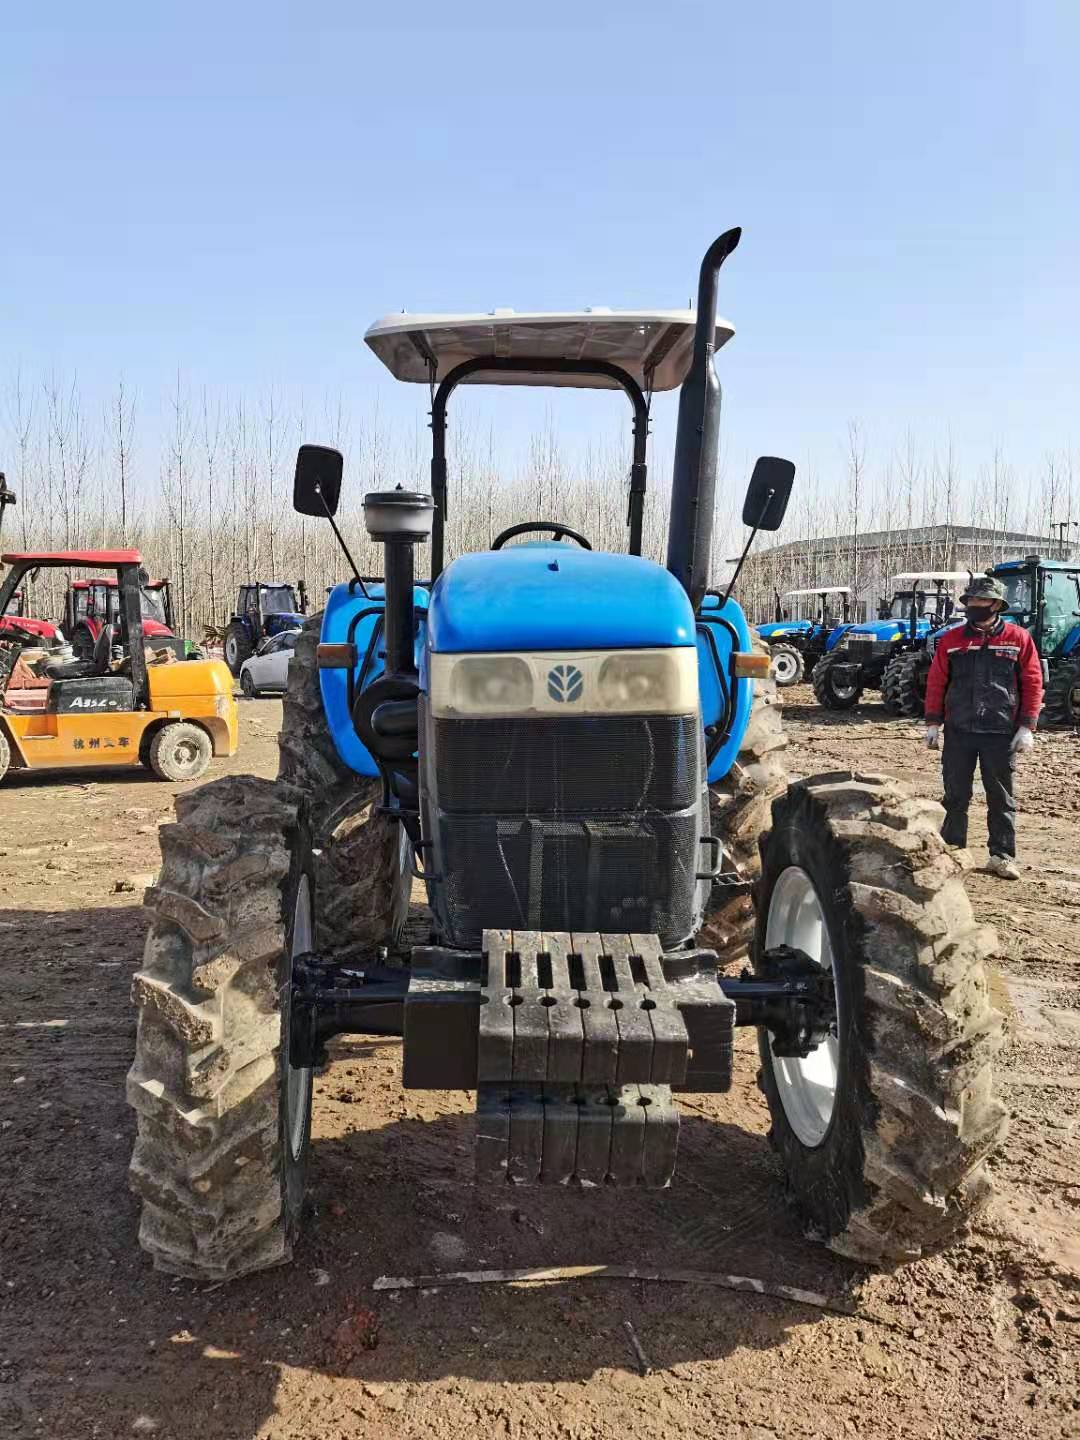 Used Light Weight New Holland TT75 2WD And 4WD Tractor